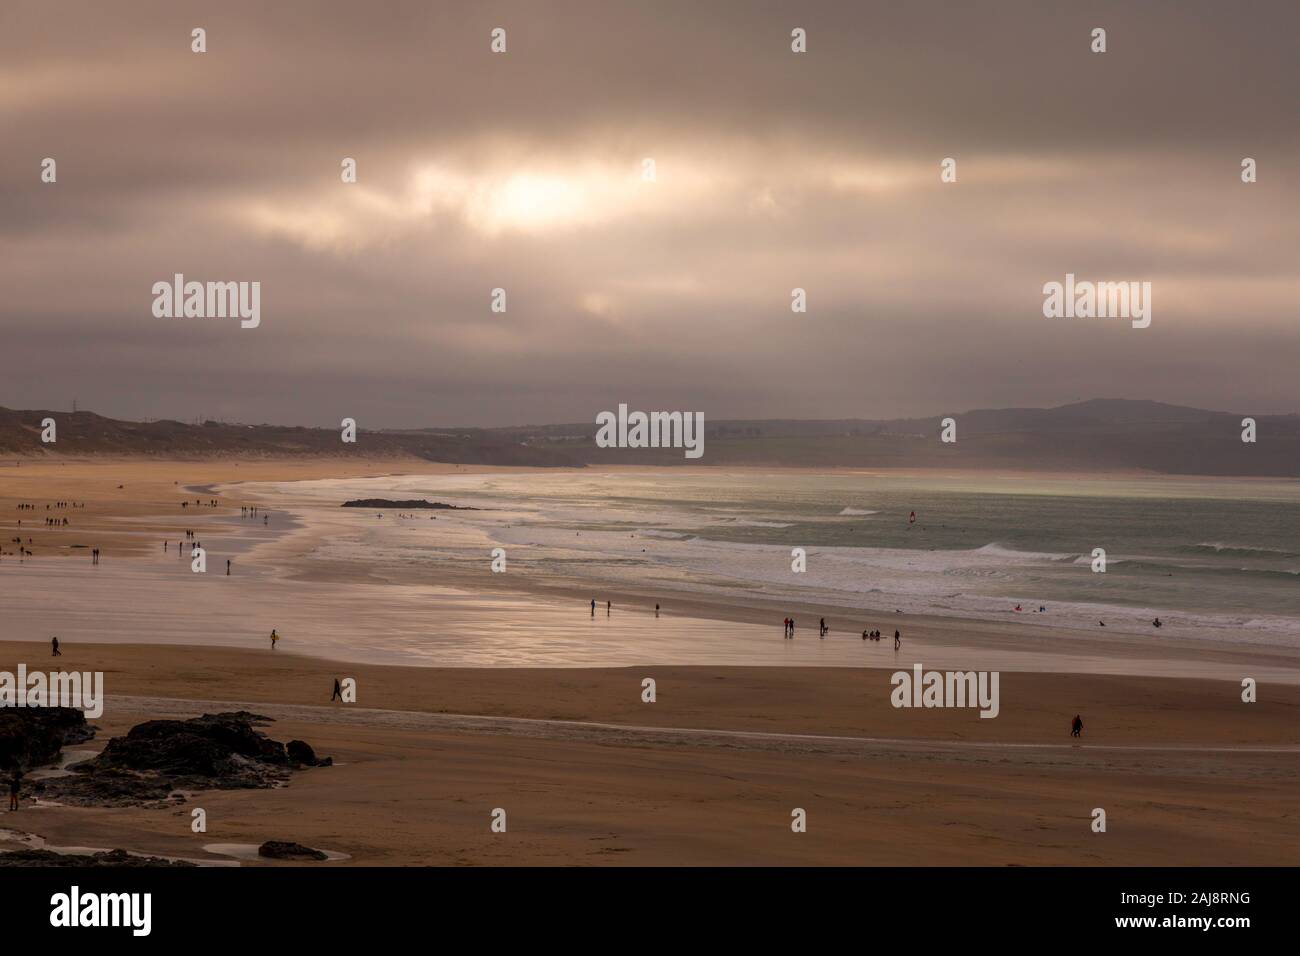 Godrevy Beach in Cornwall England during early evening, with holiday makers and surfers. Stock Photo